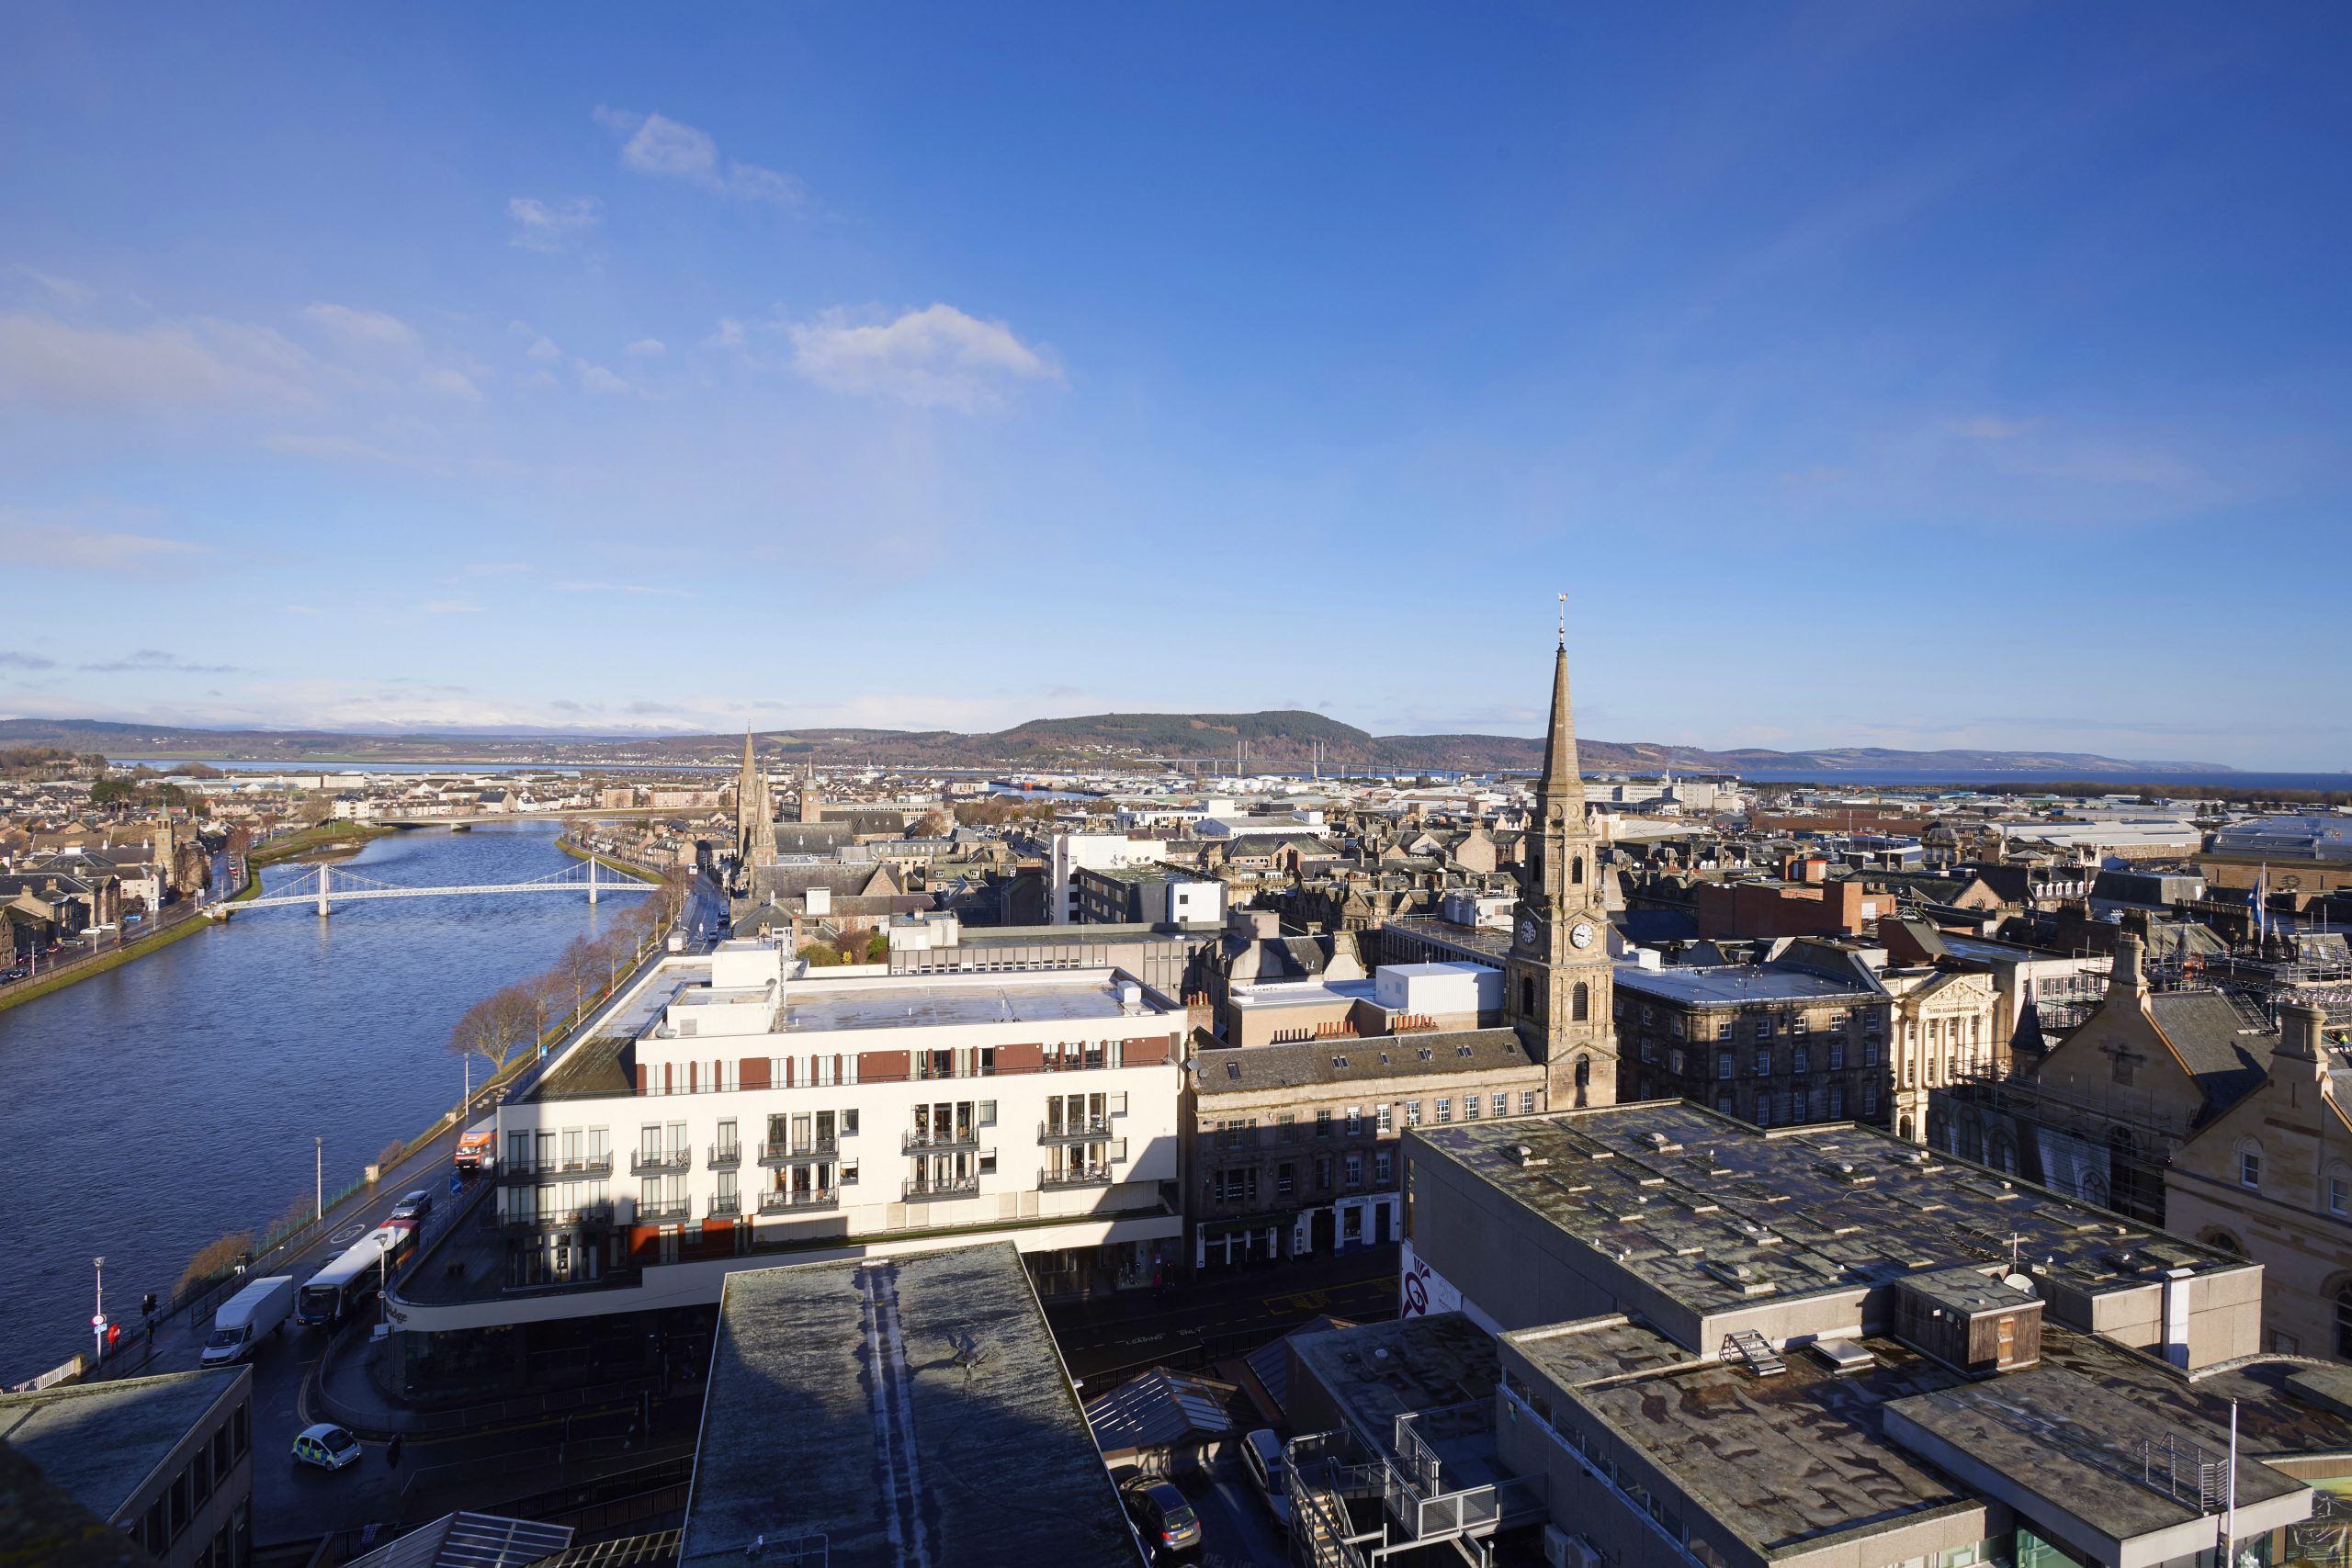 A view of Inverness city from above looking towards Beauly Firth